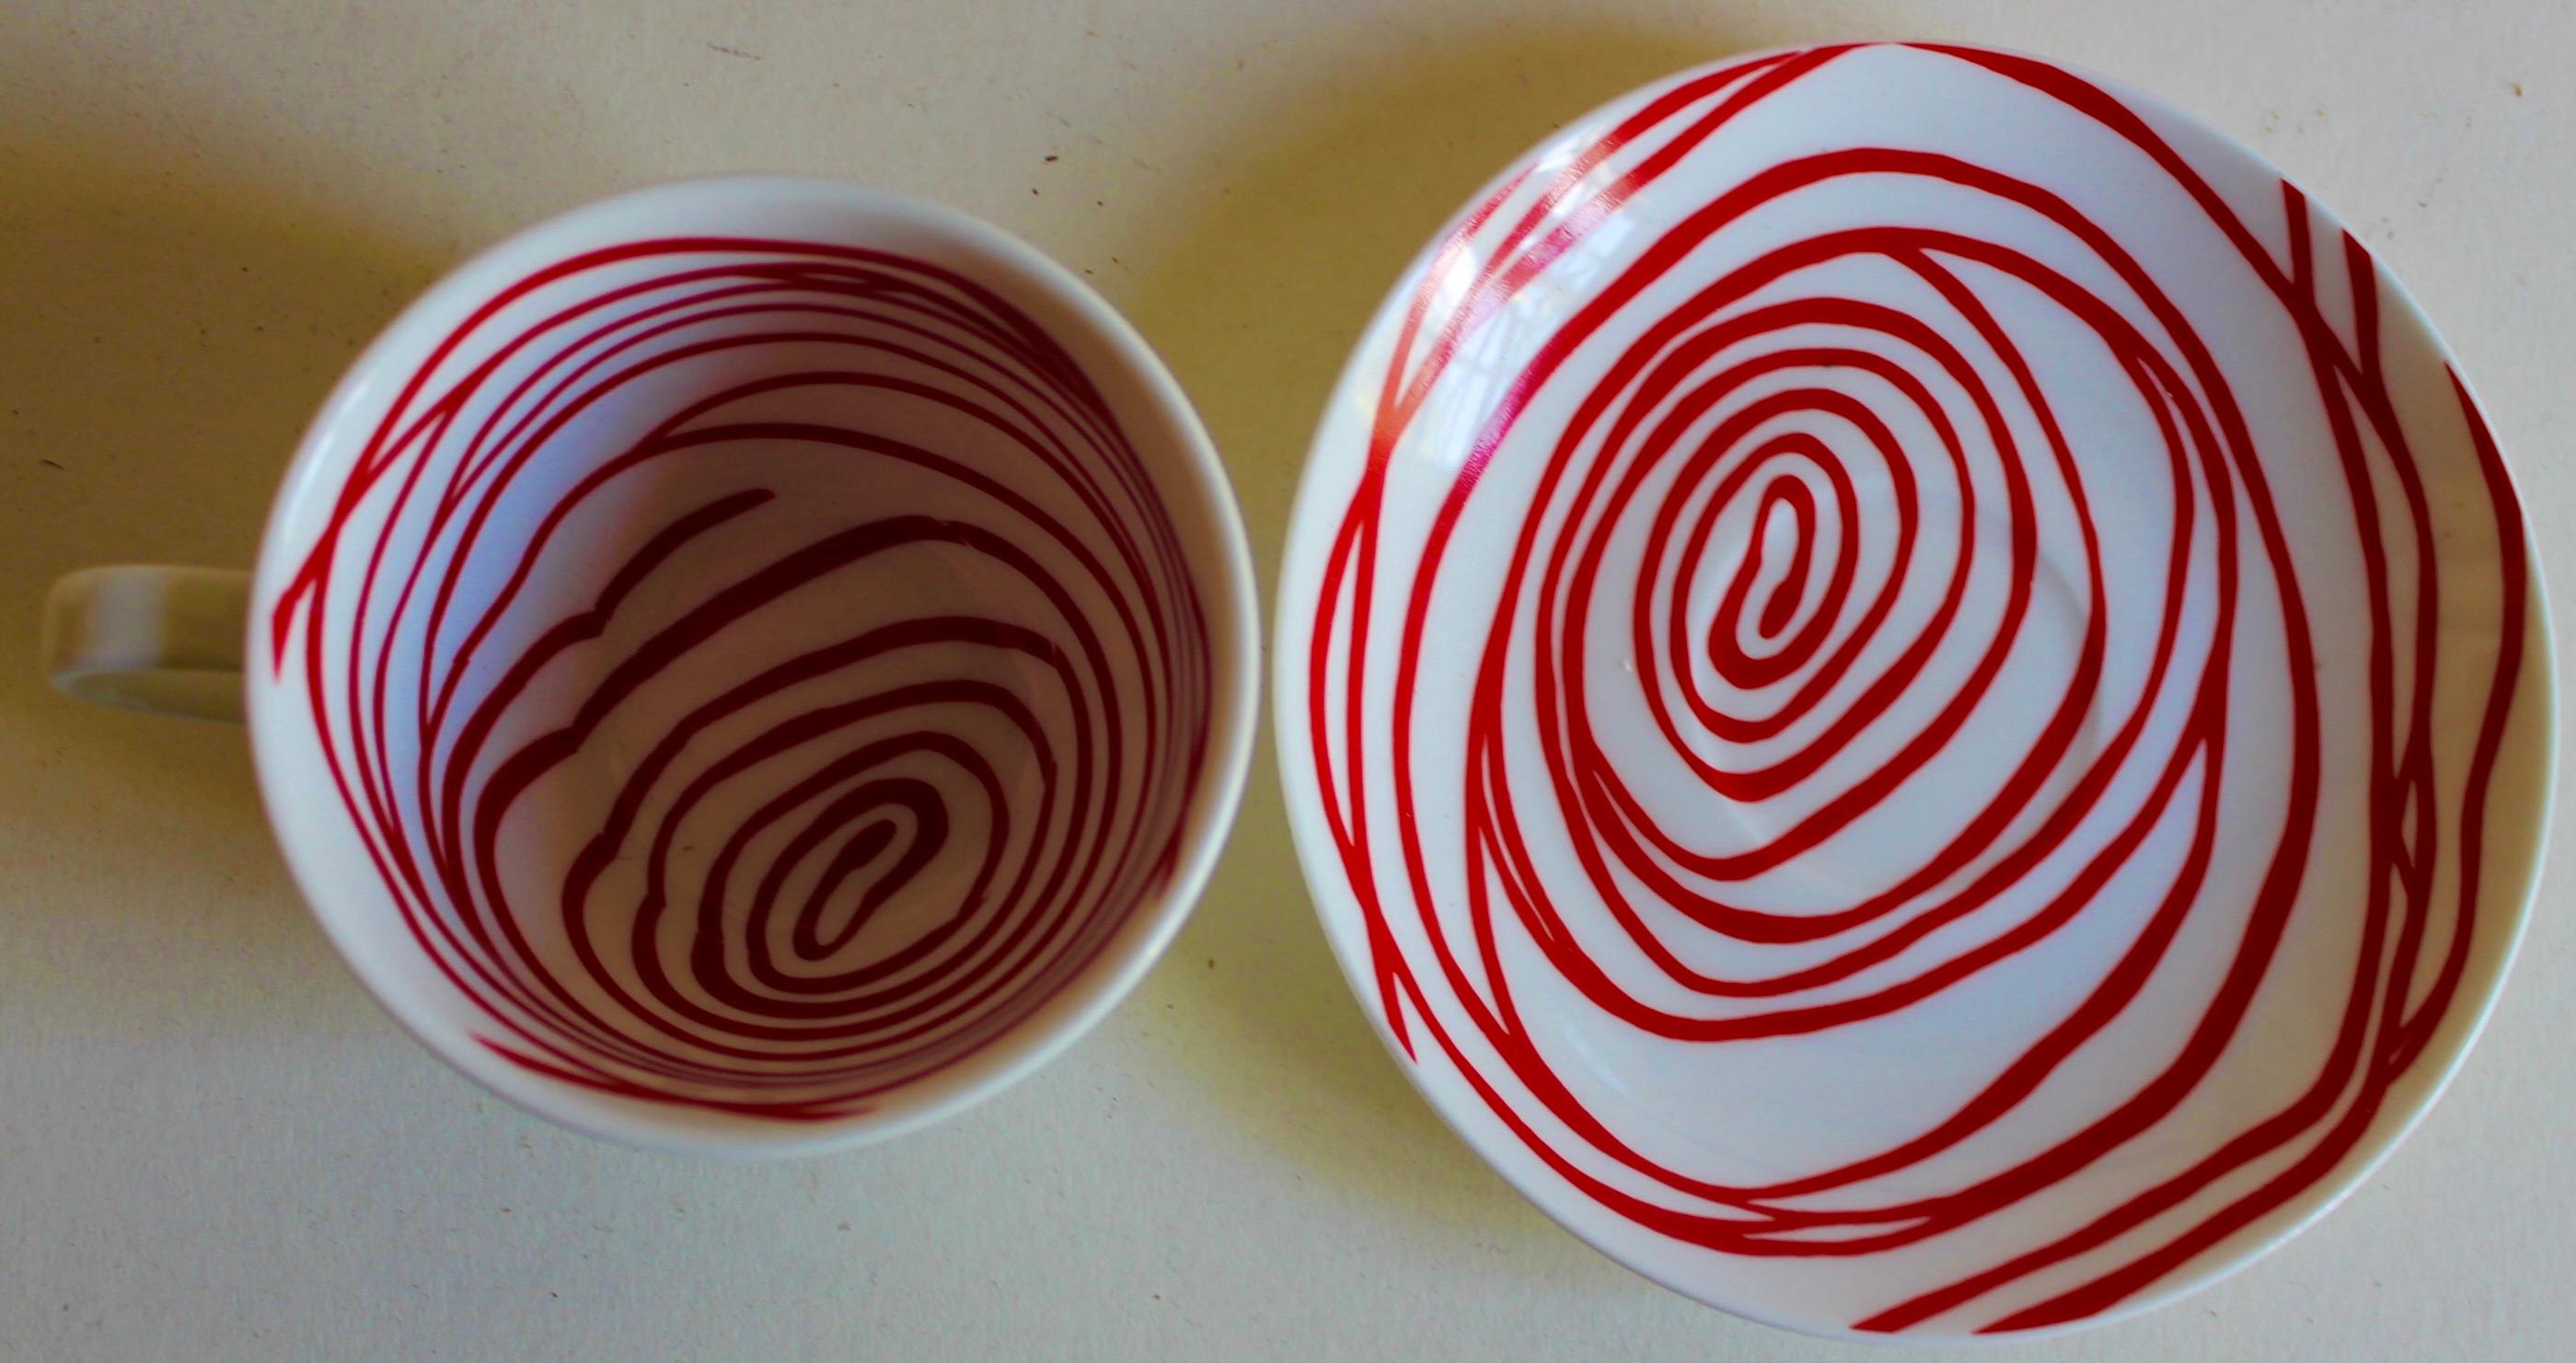 Louise Bourgeois Cup & Saucer for MOMA For Sale 1